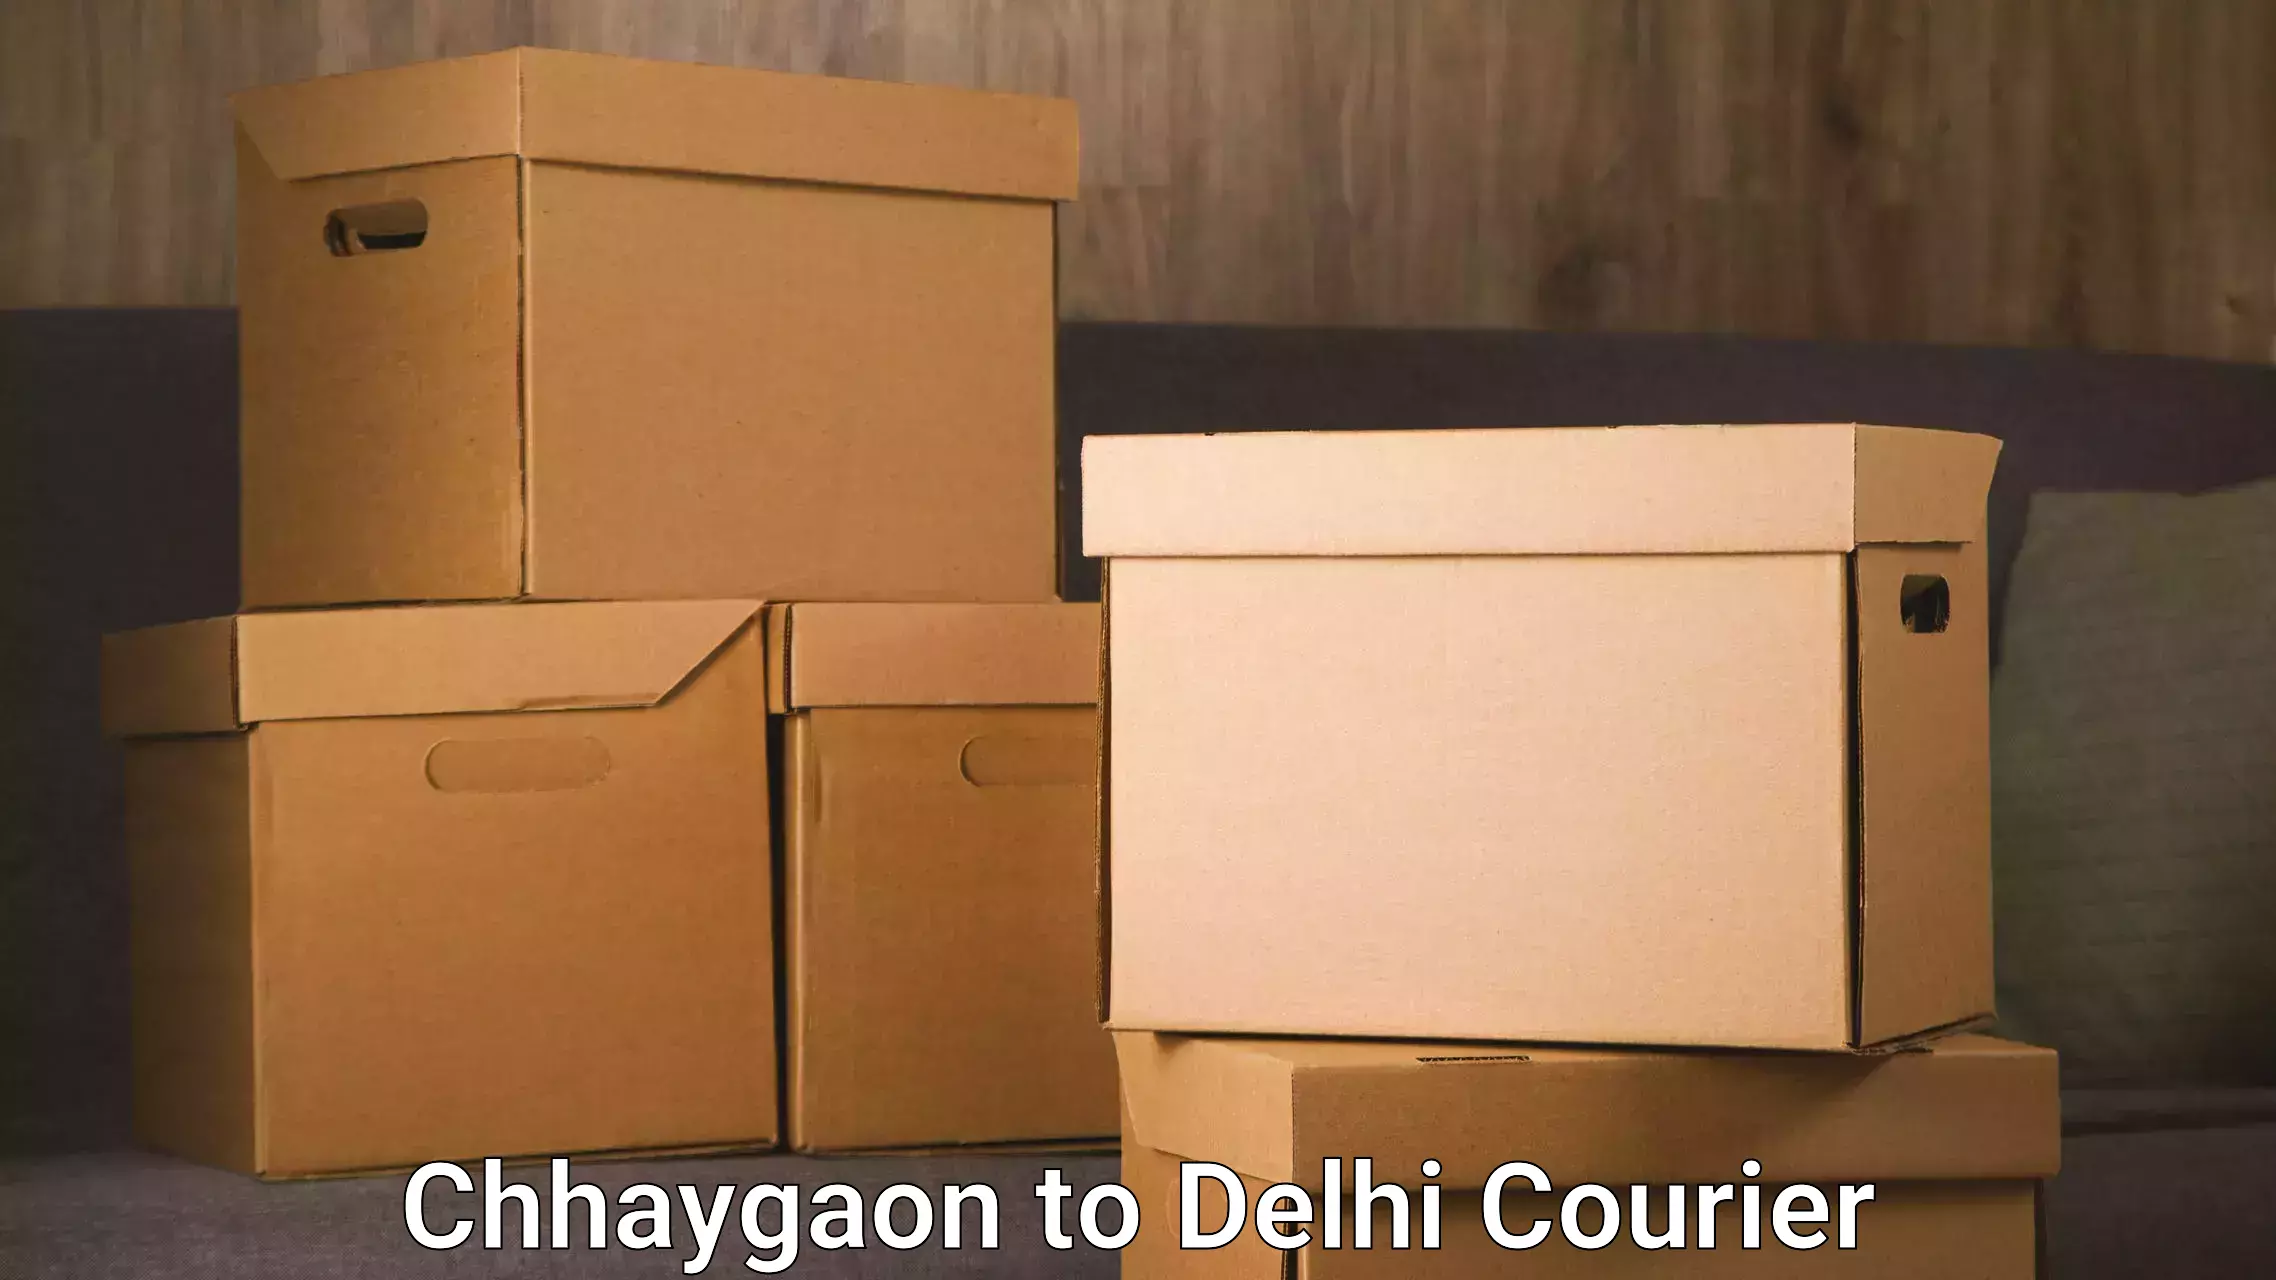 Enhanced tracking features Chhaygaon to Delhi